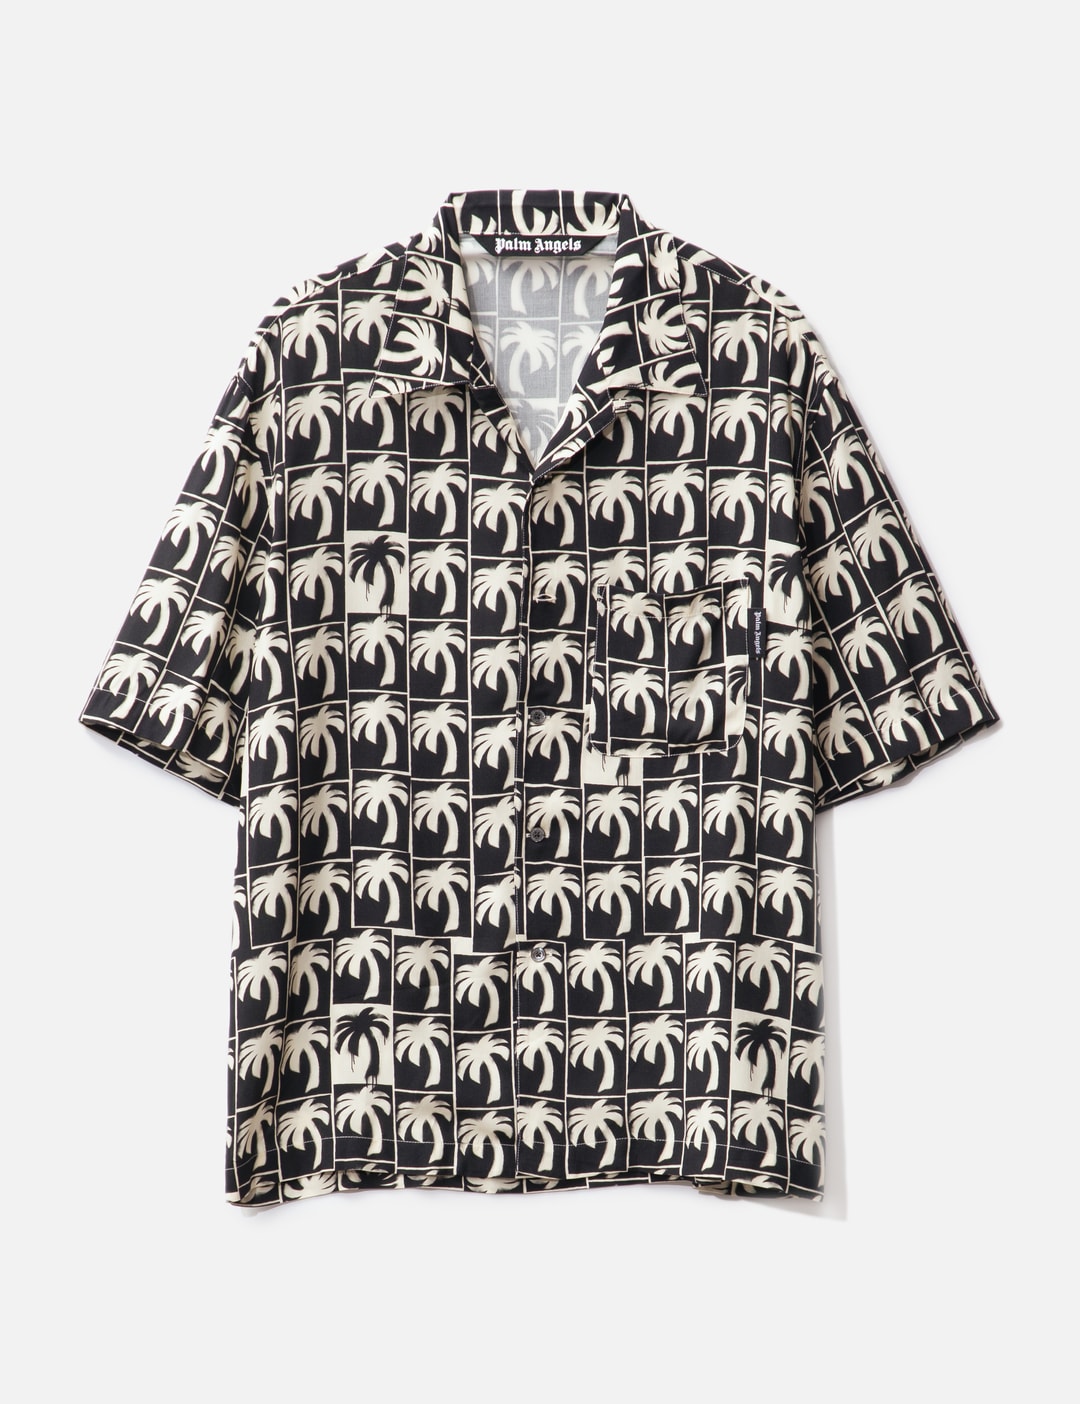 Palm Angels - Dripping Palm Bowling Shirt | HBX - Globally Curated ...